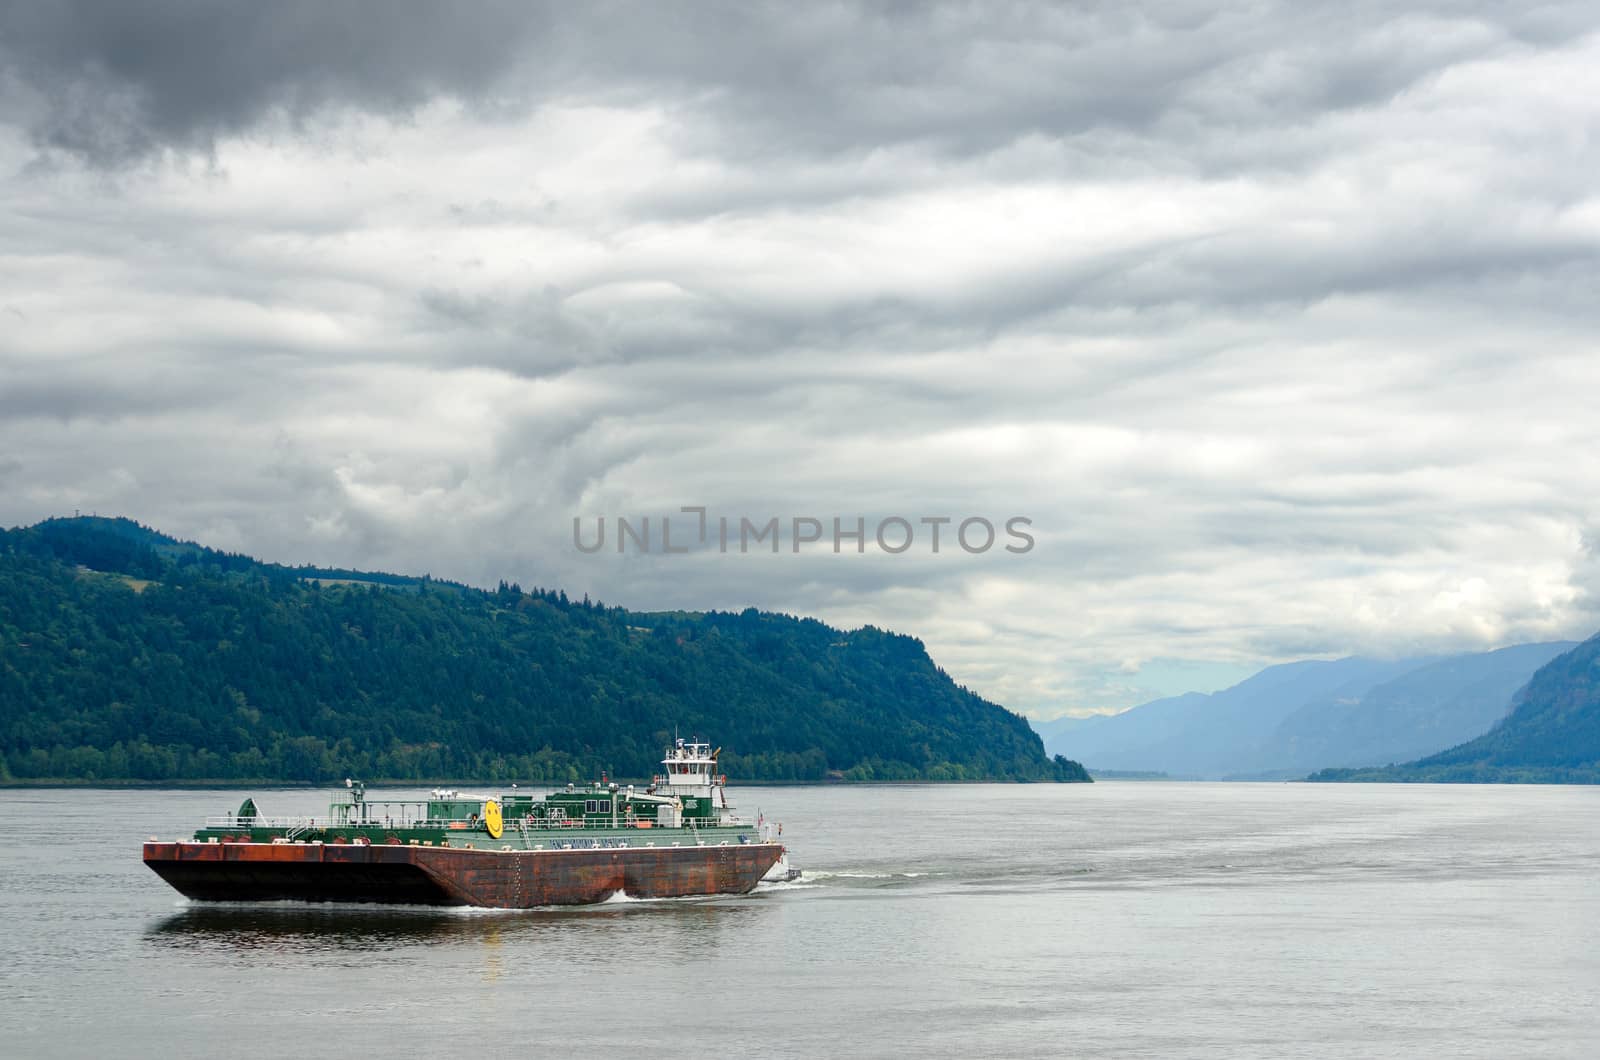 A barge passing through the Columbia River Gorge between Oregon and Washington